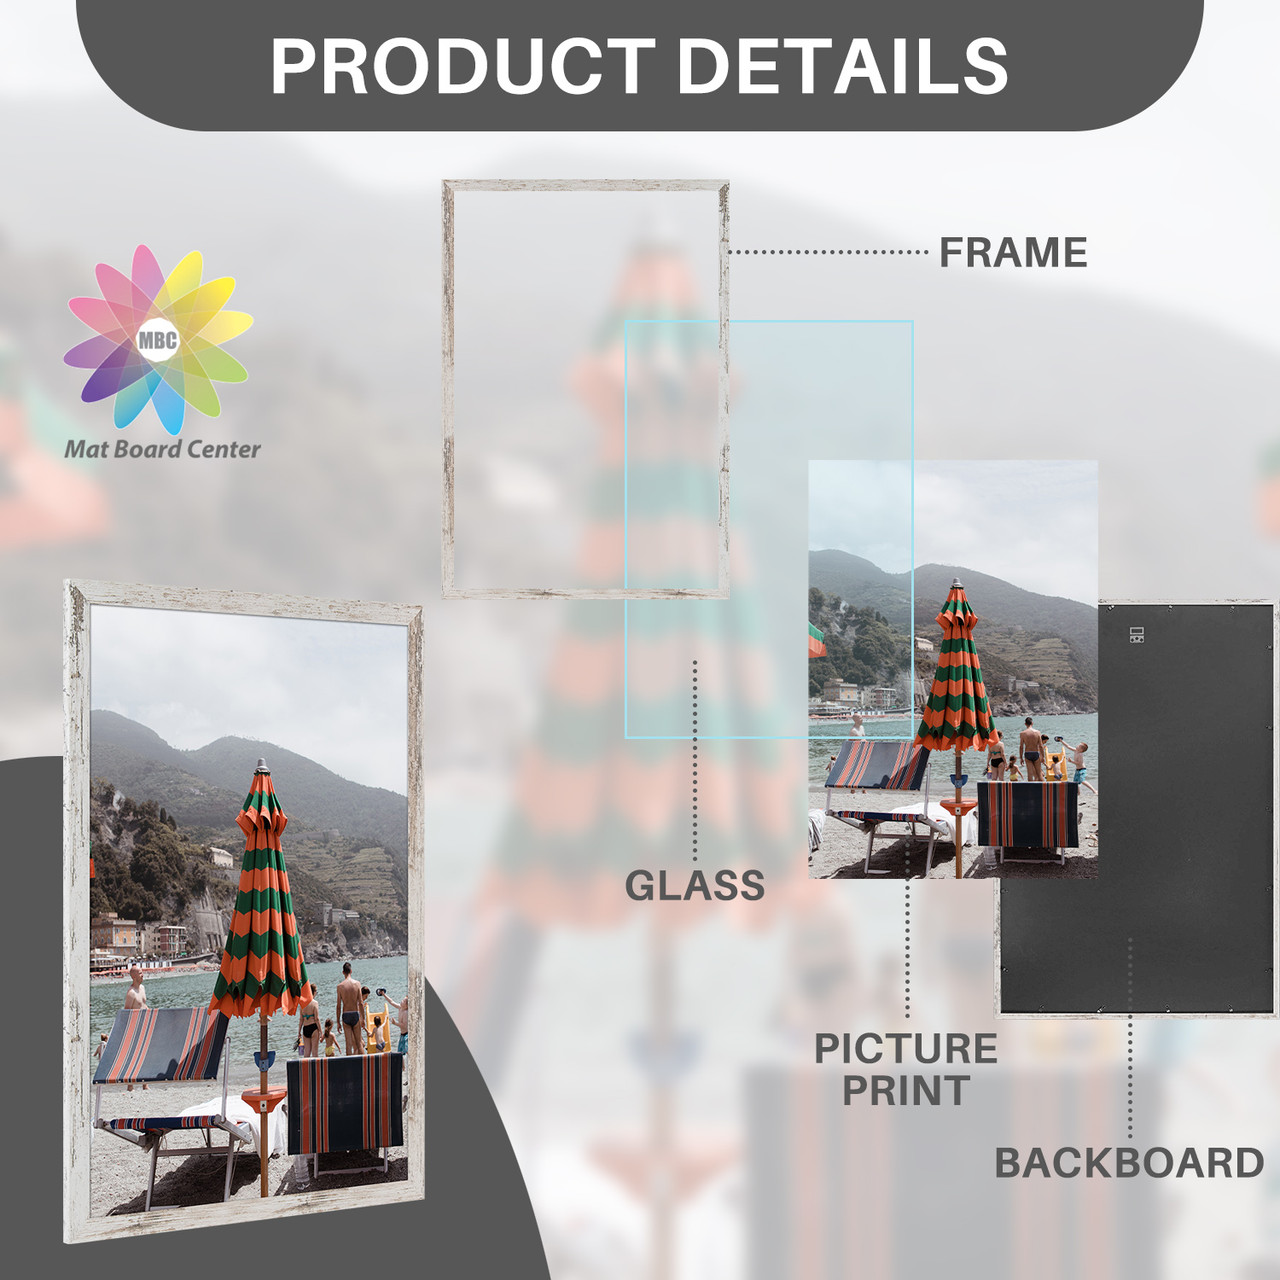 Pack of 2, 24x36 White Poster Picture Frame with Plexiglass